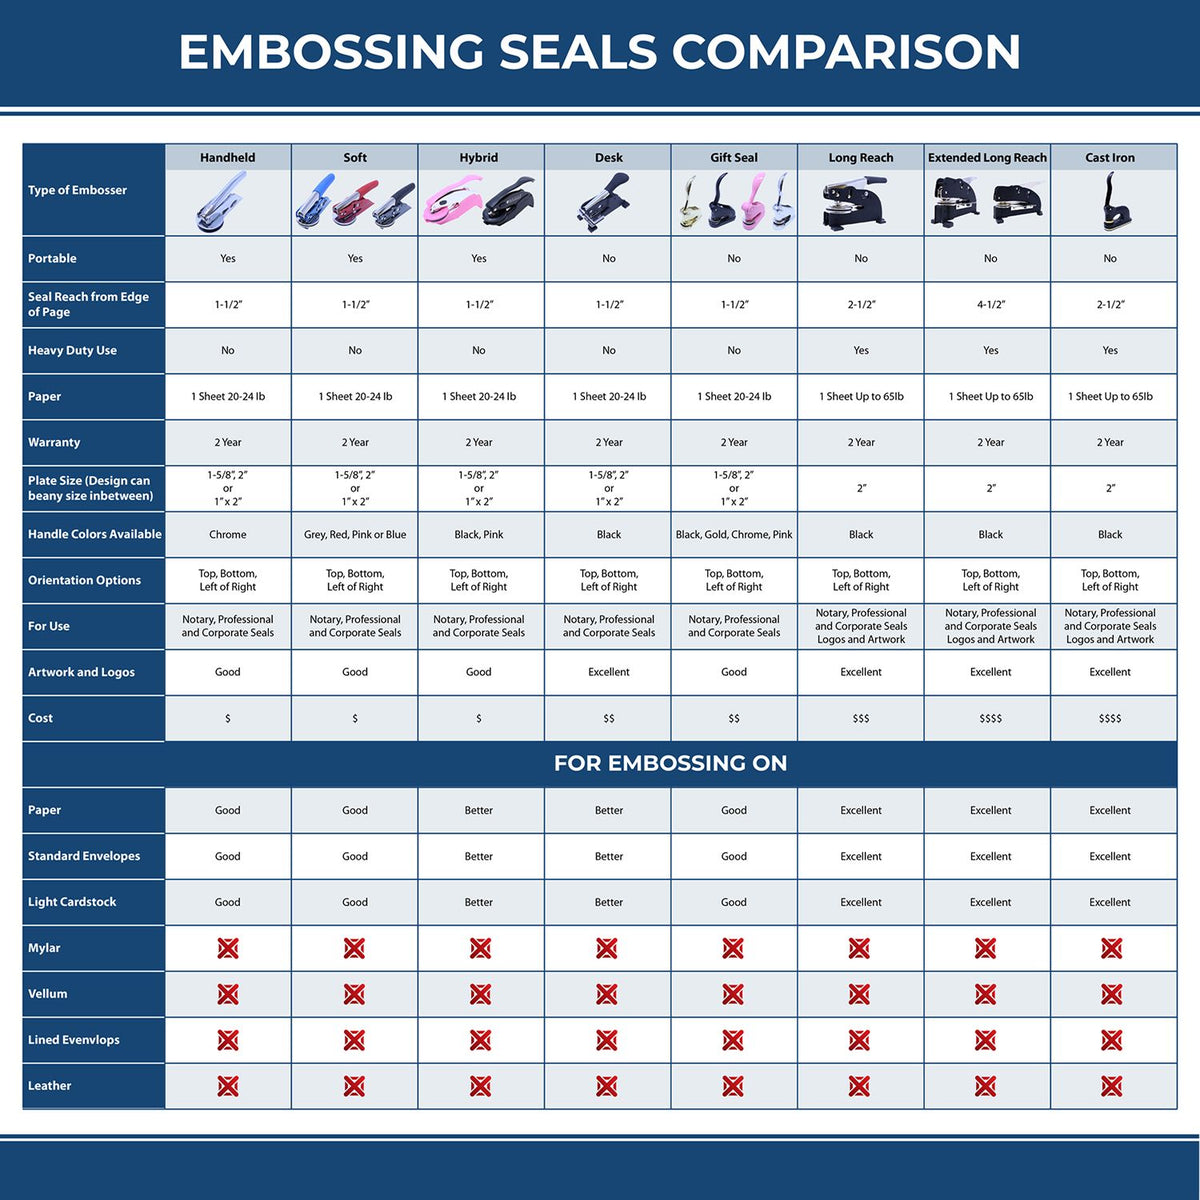 A comparison chart for the different types of mount models available for the Gift Washington Land Surveyor Seal